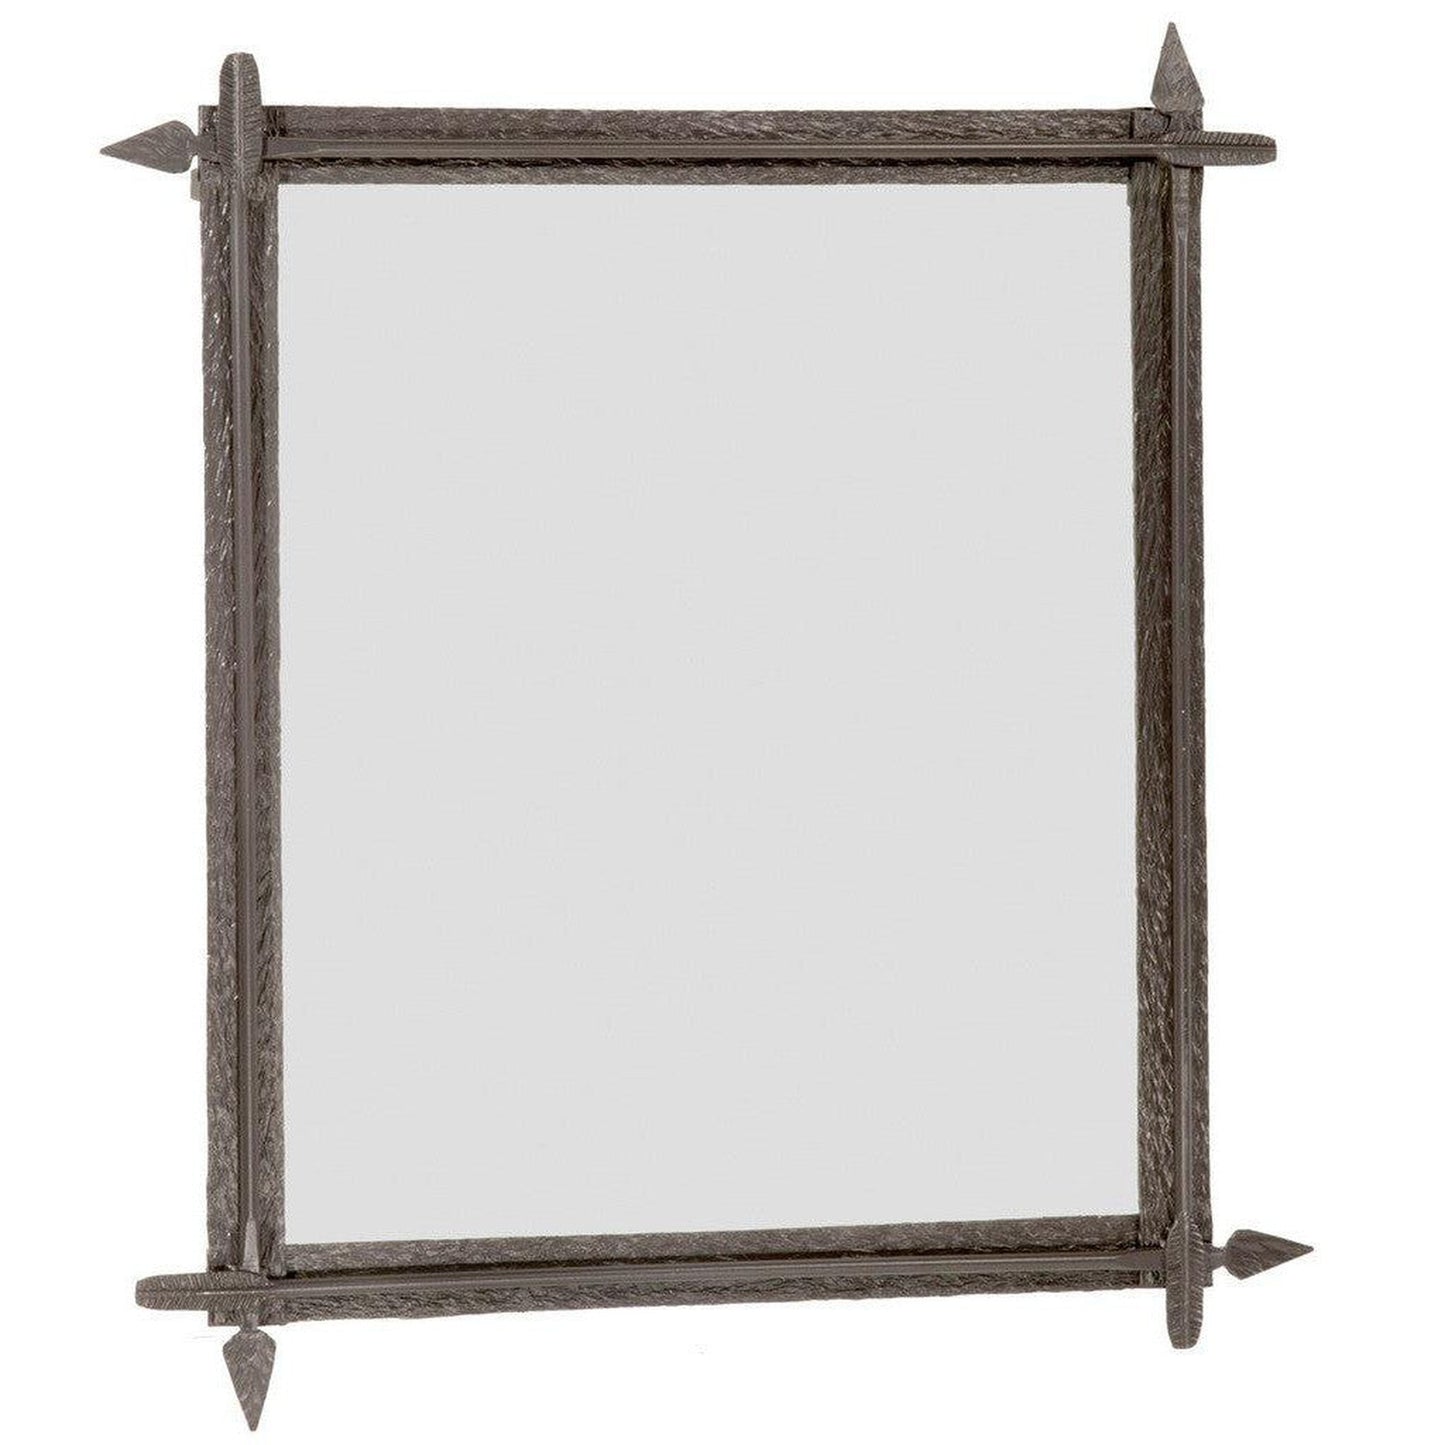 Stone County Ironworks Quapaw 28" x 32" Small Chalk White Iron Wall Mirror With Gold Iron Accent